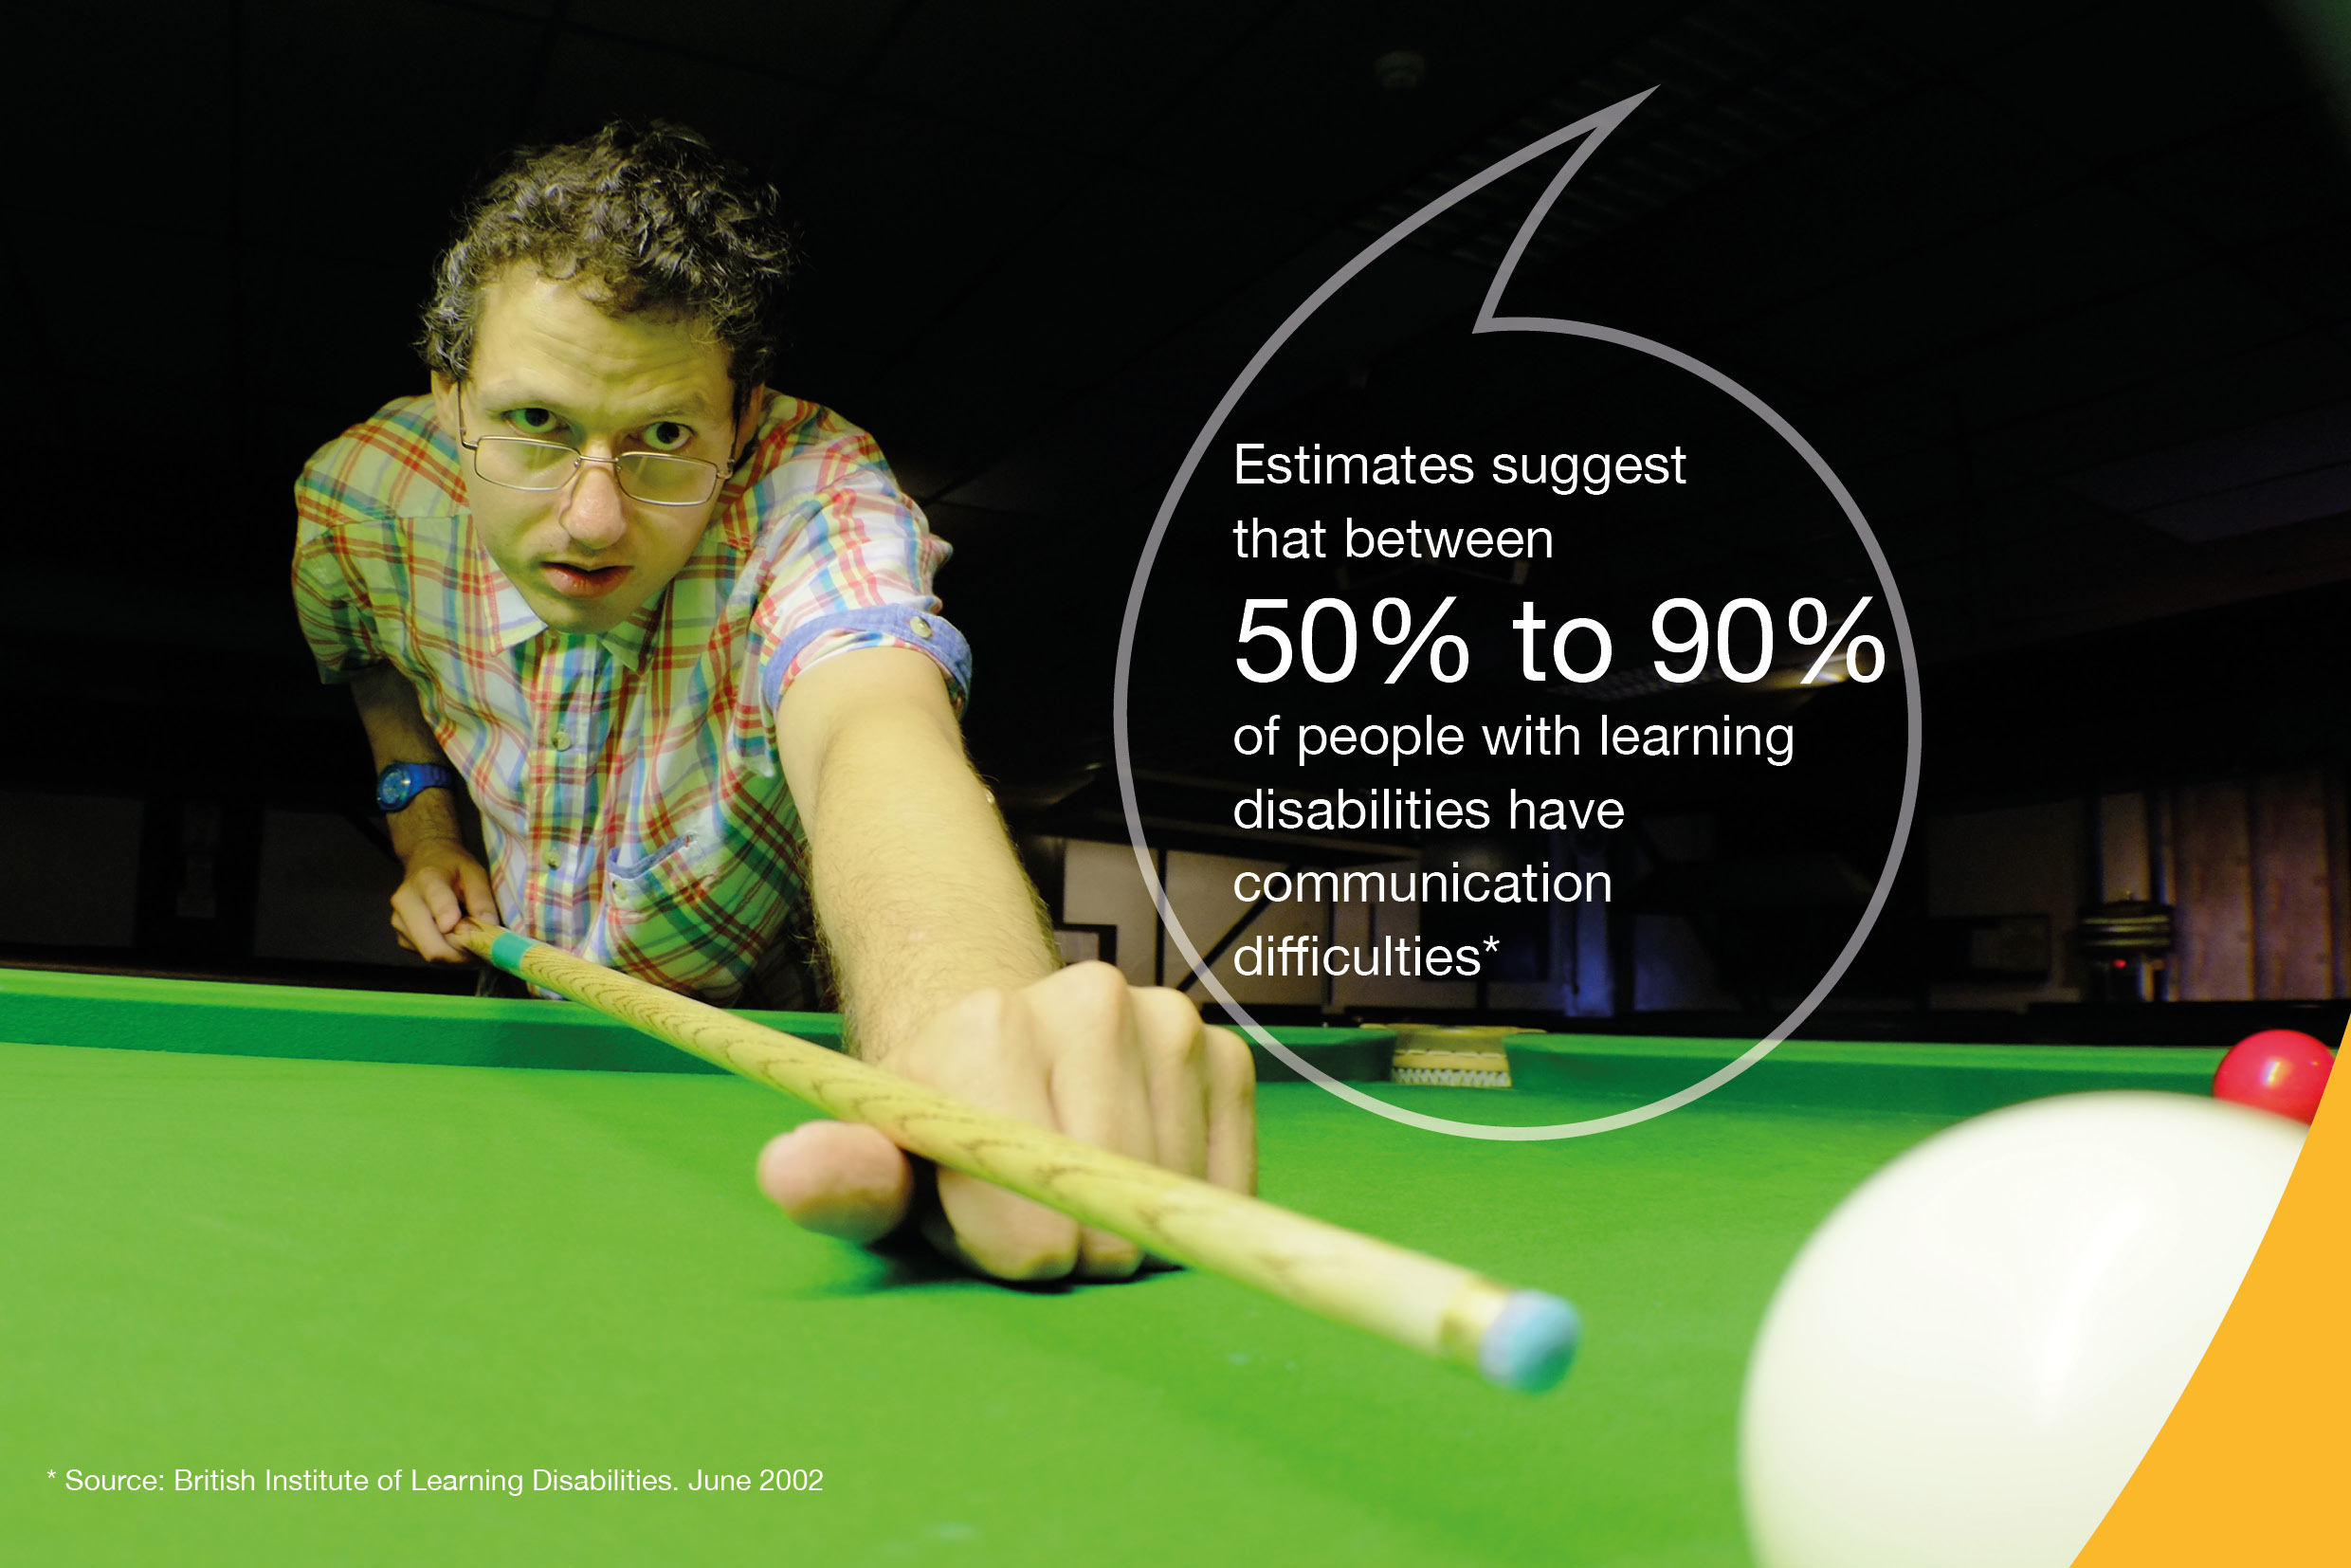 Photograph of person with a learning disability playing snooker